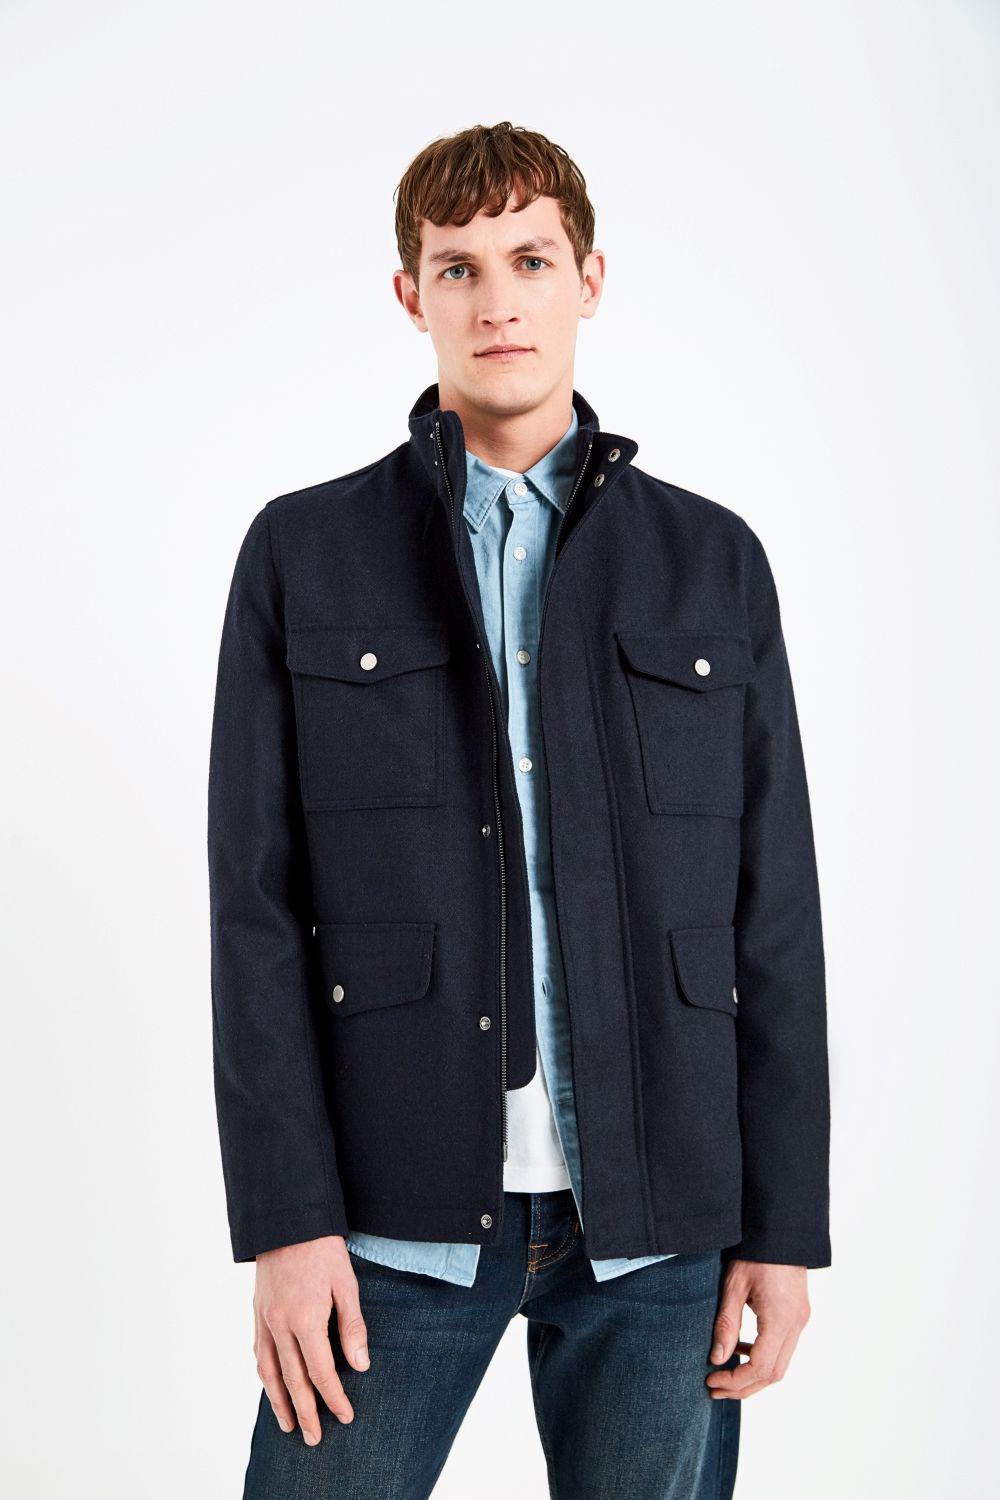 Lyst - Jack Wills Bordfield Wool Military Jacket in Blue for Men